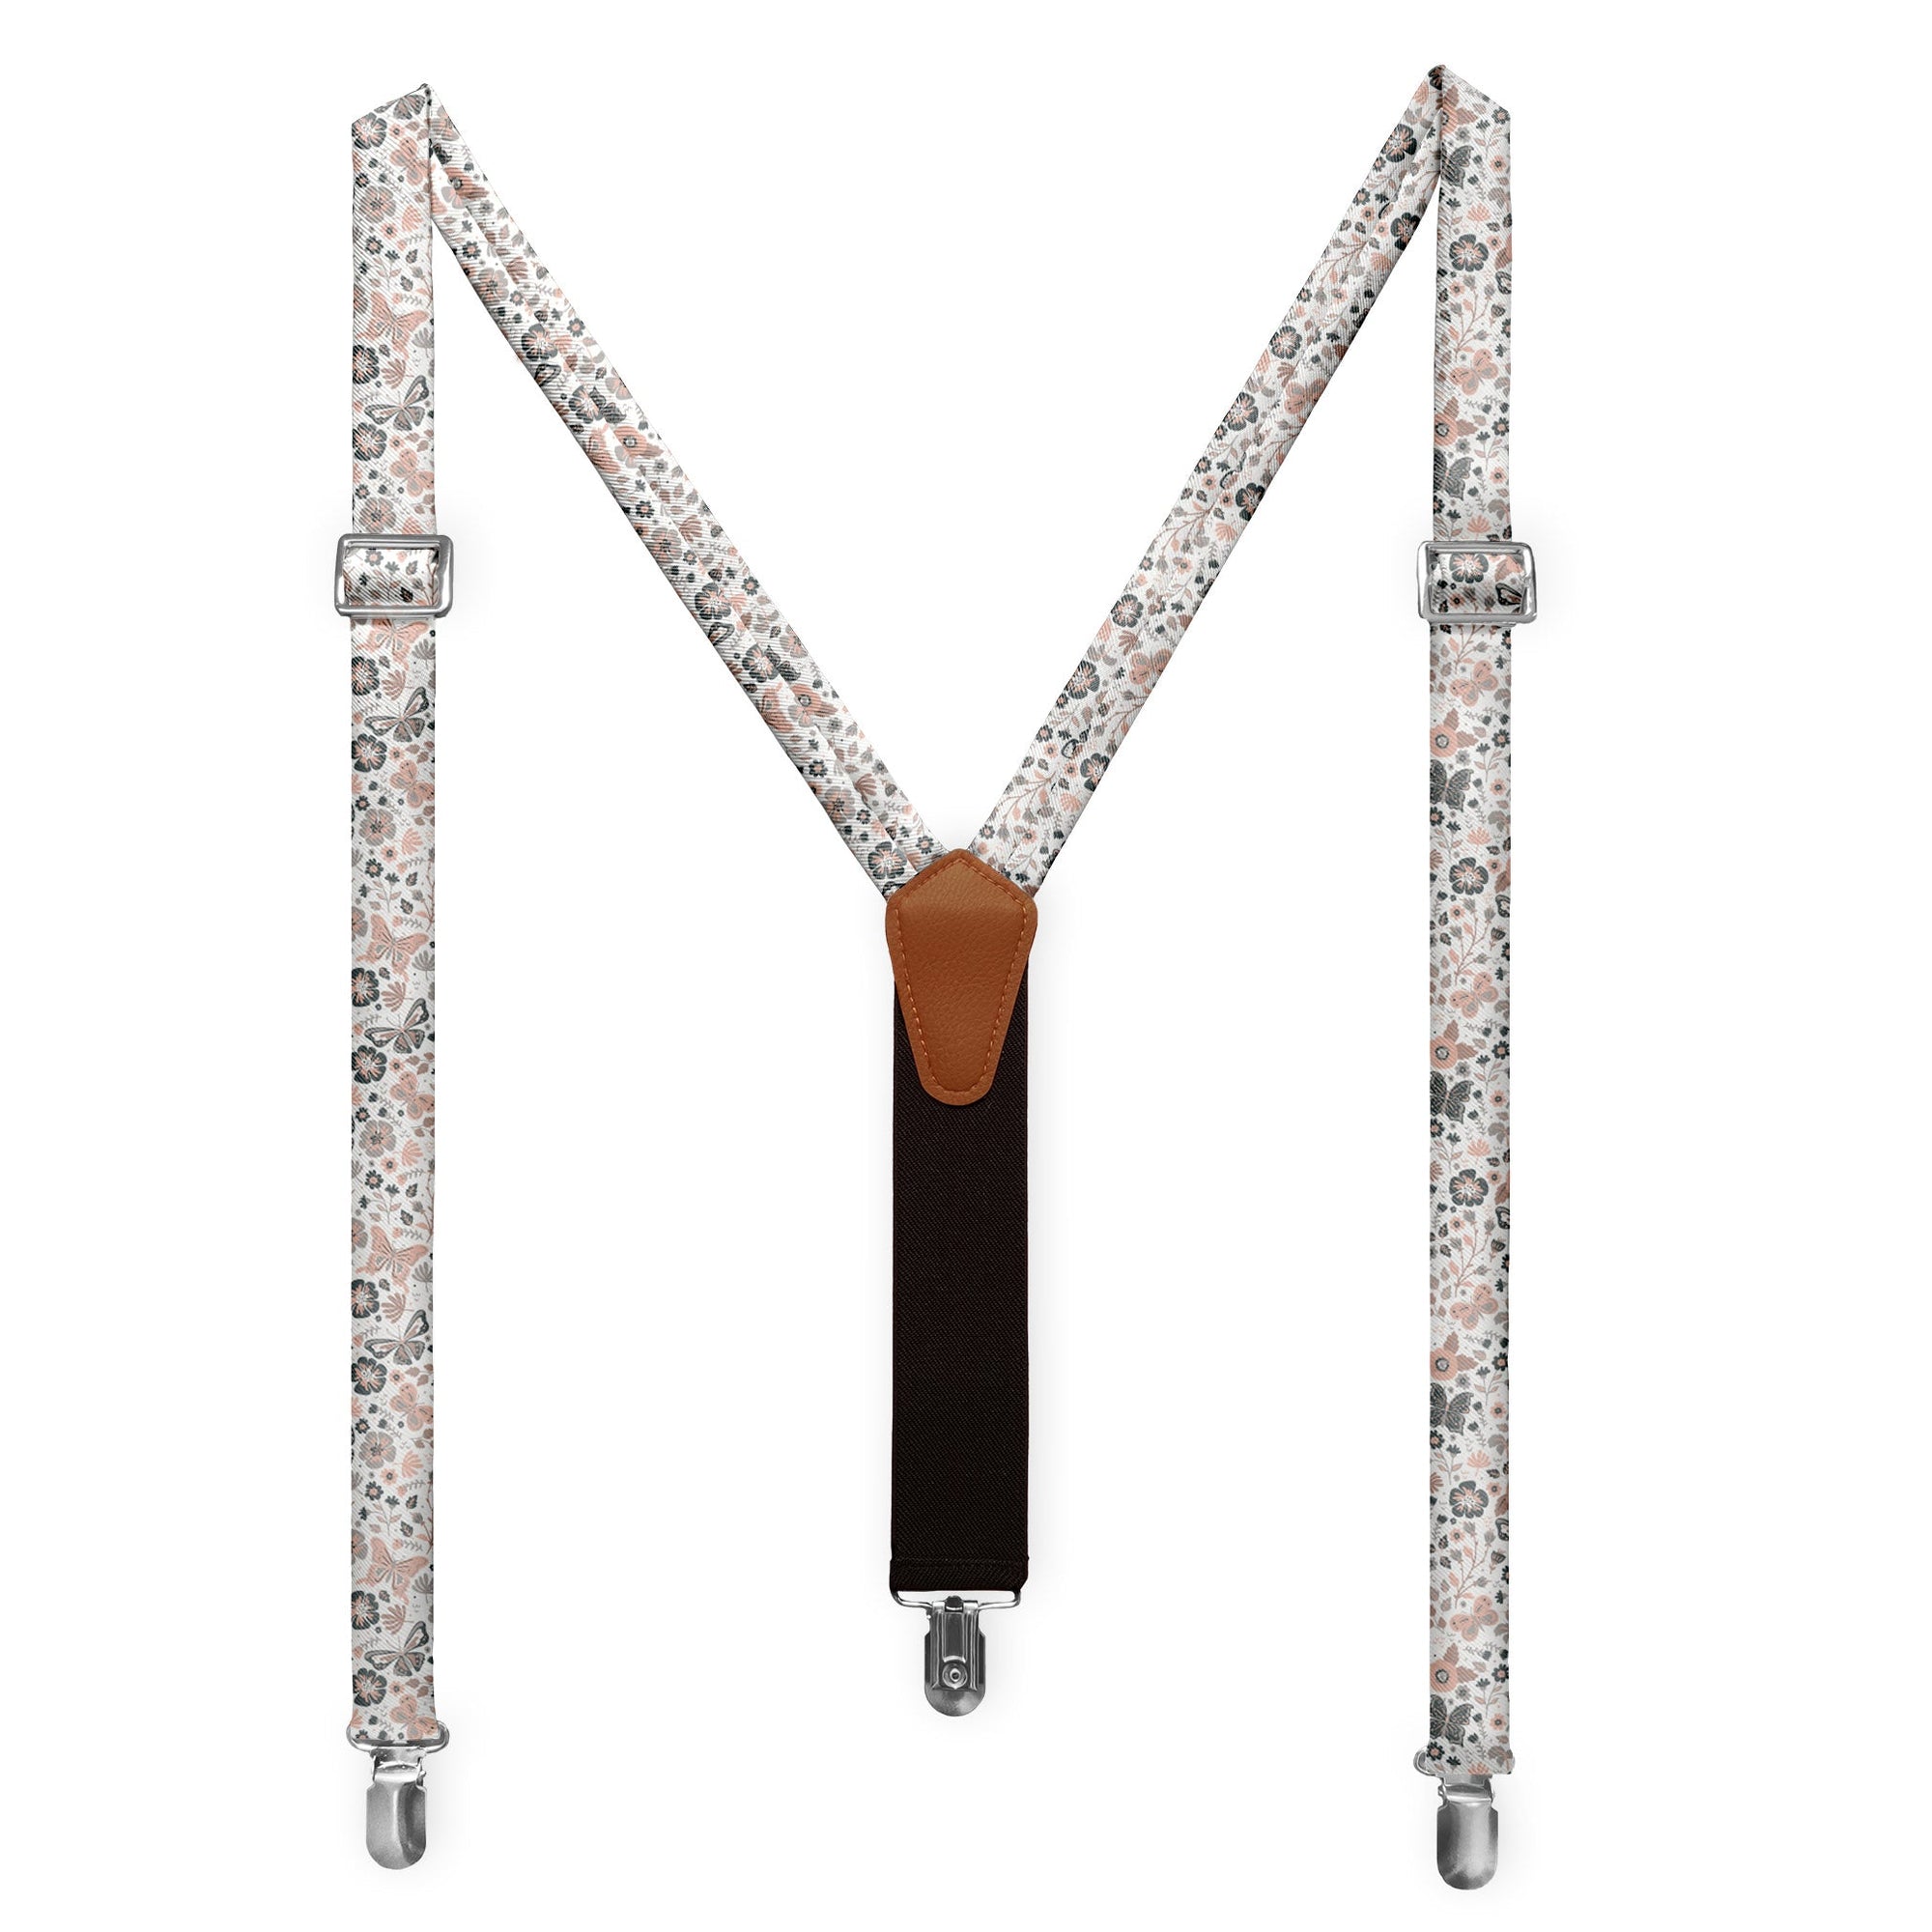 Mariposa Floral Suspenders -  -  - Knotty Tie Co.